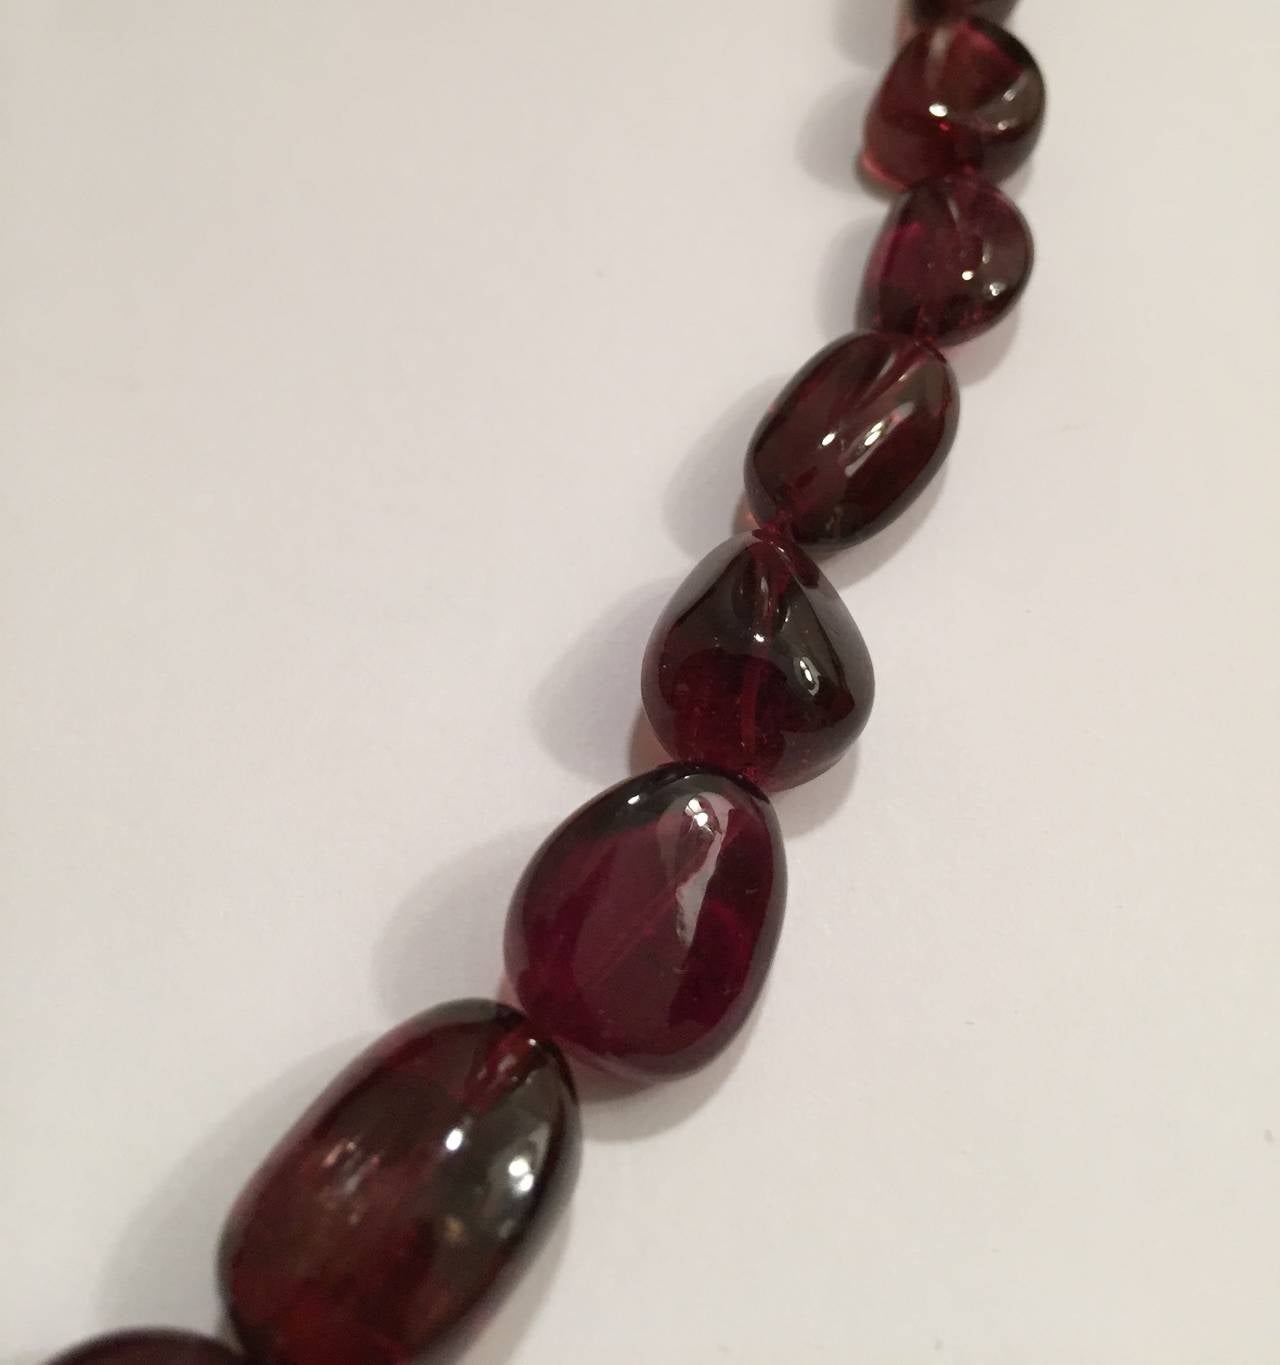 Elegant Rubleite Bead Necklace finished with an 18kt Yellow Gold clasp.  The The beautiful deep hue is perfect to pair with all seasons of fashion.

The graduated beads measure 22mm to 8 mm in length.  The necklace is finished at 17